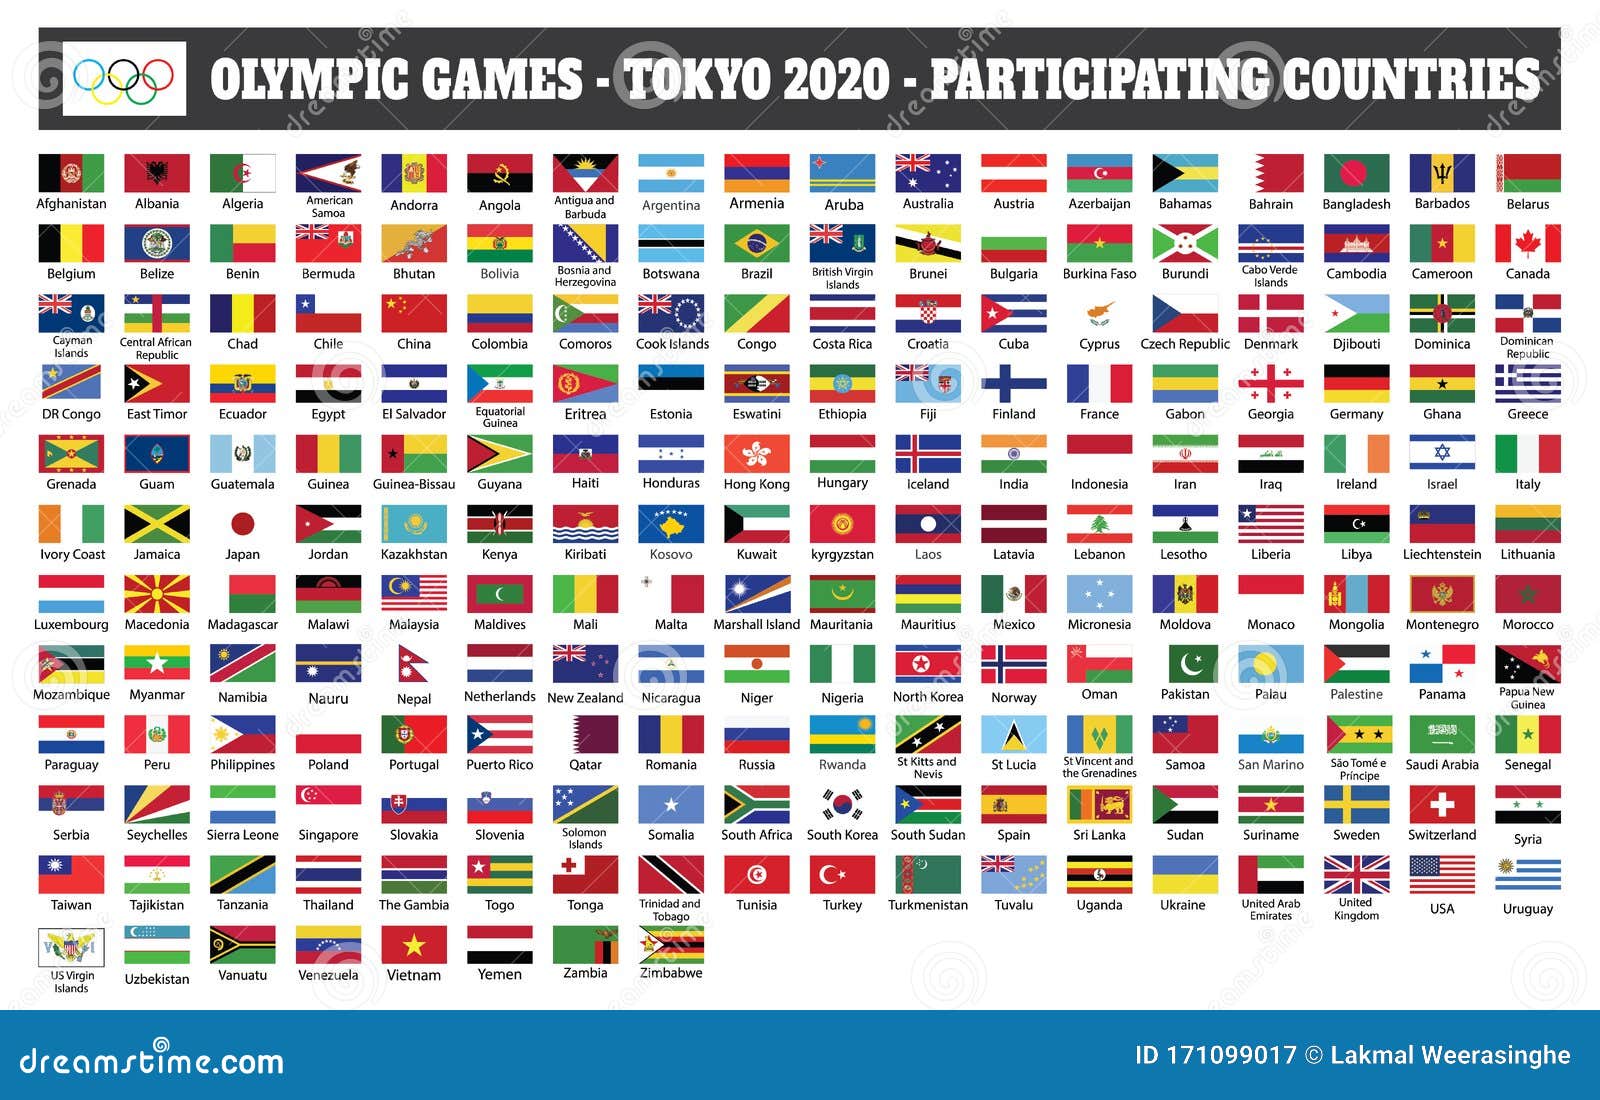 Printable Olympic Schedule Tokyo bmpnow